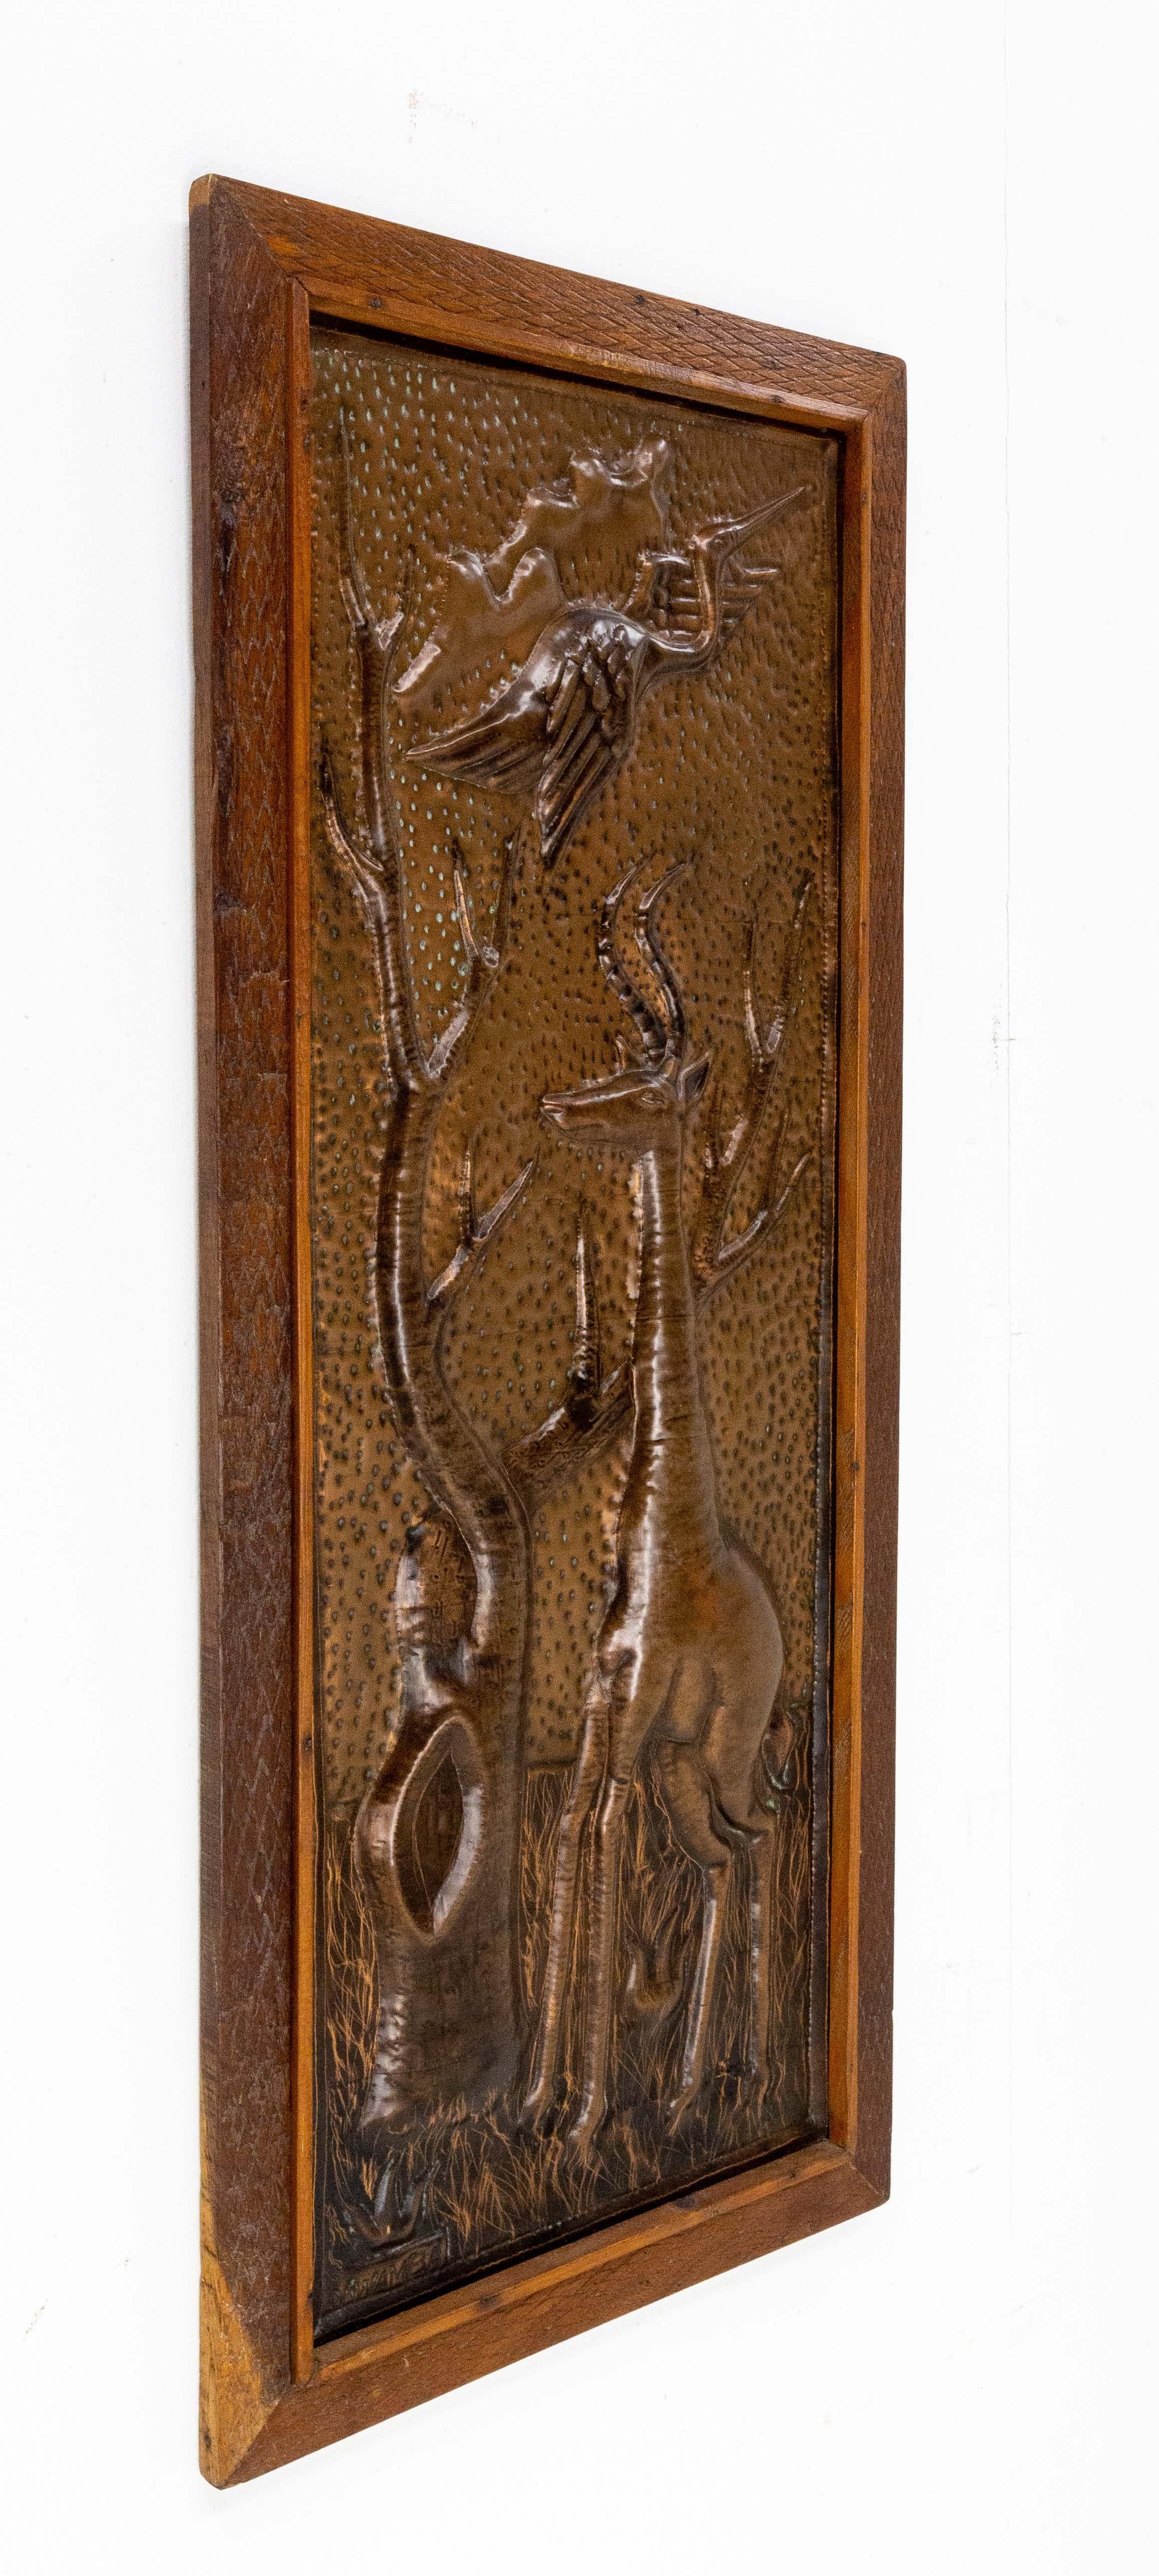 African carved giraffe representation
Embossed copper and frame in carved iroko
Signed Mwamba

Shipping:
L 40 P2,5 H86.